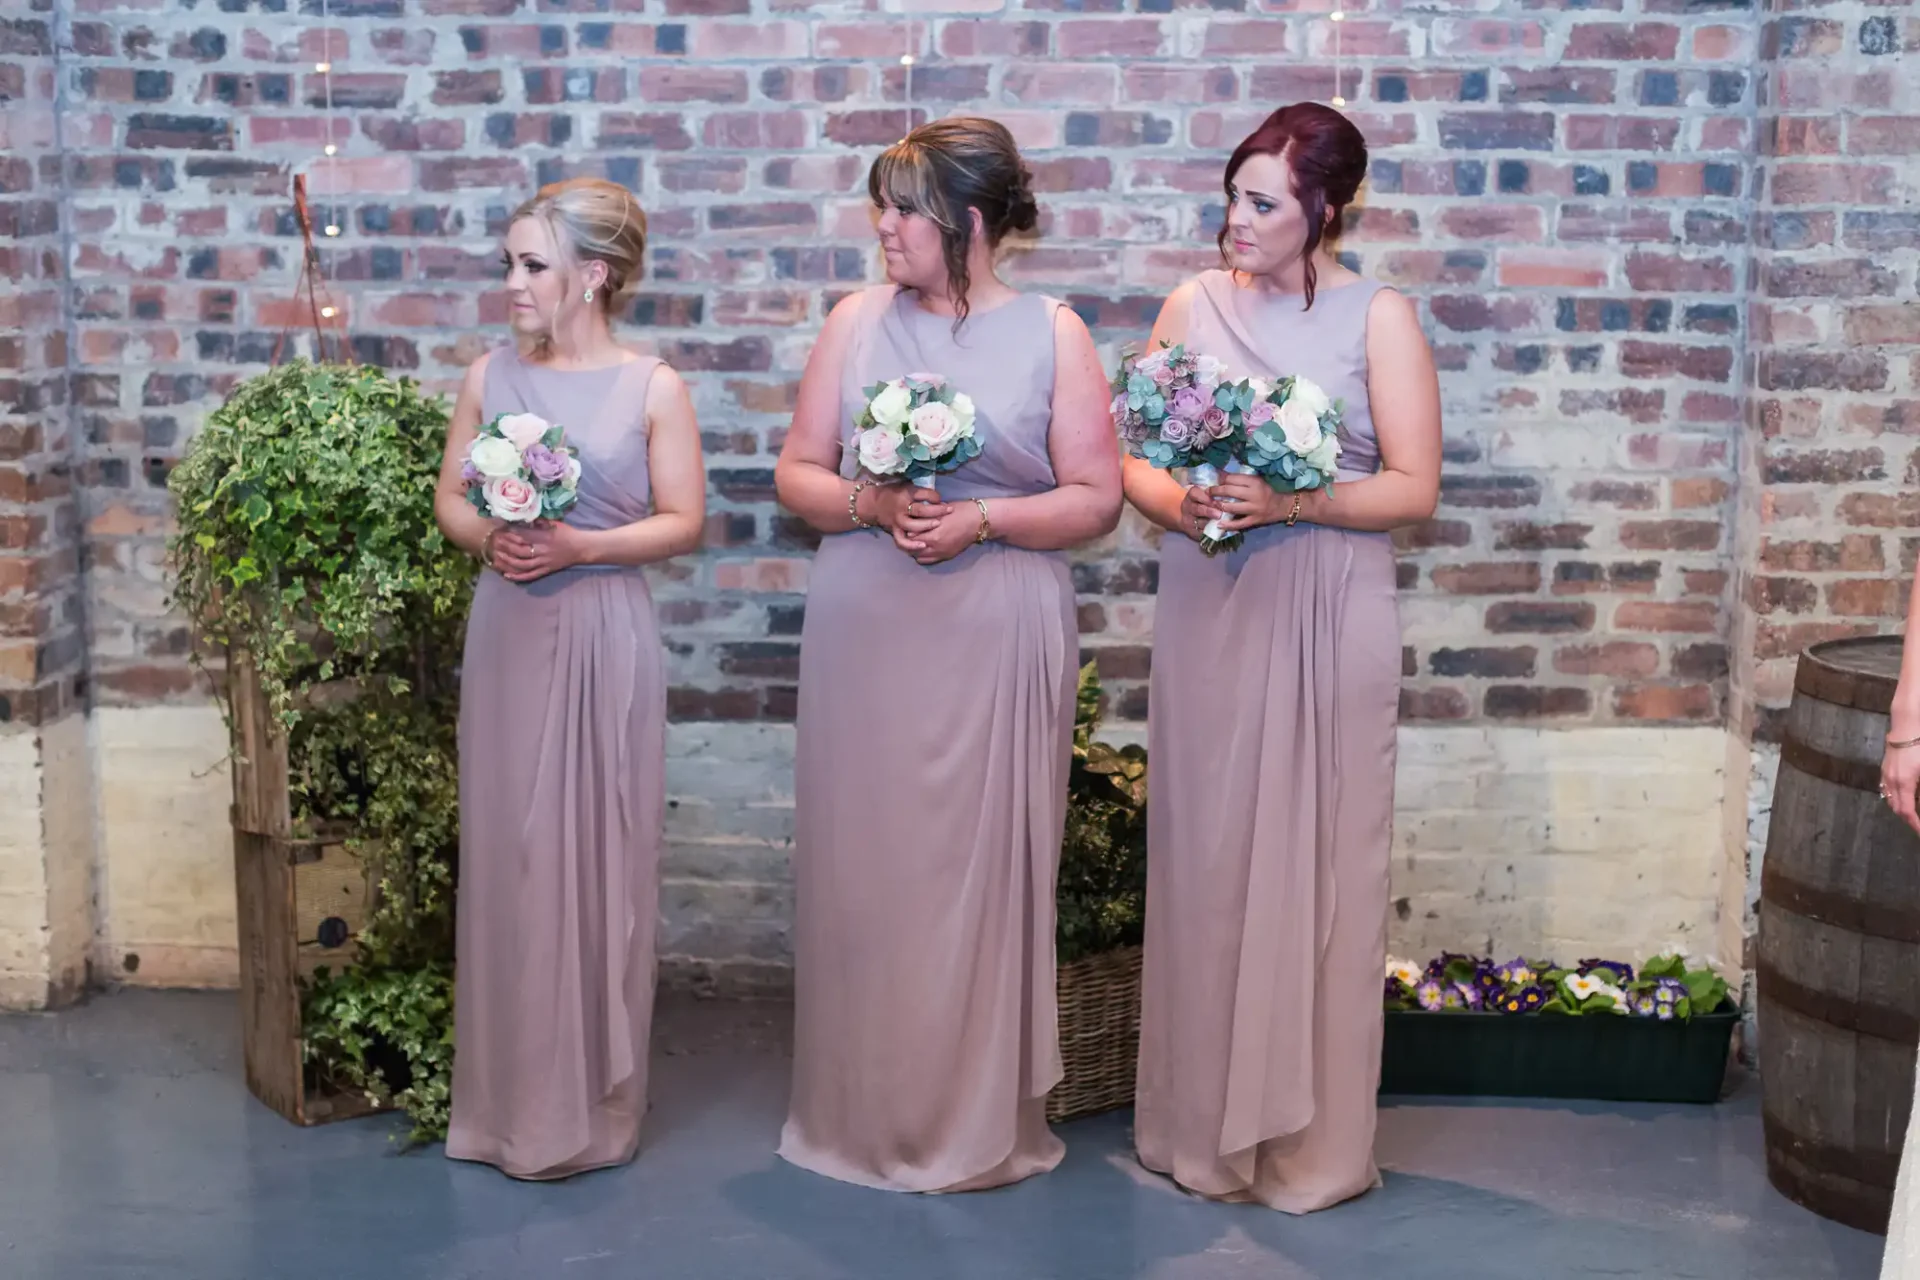 Three bridesmaids in matching pastel dresses holding bouquets, standing against a brick wall in a rustic setting.